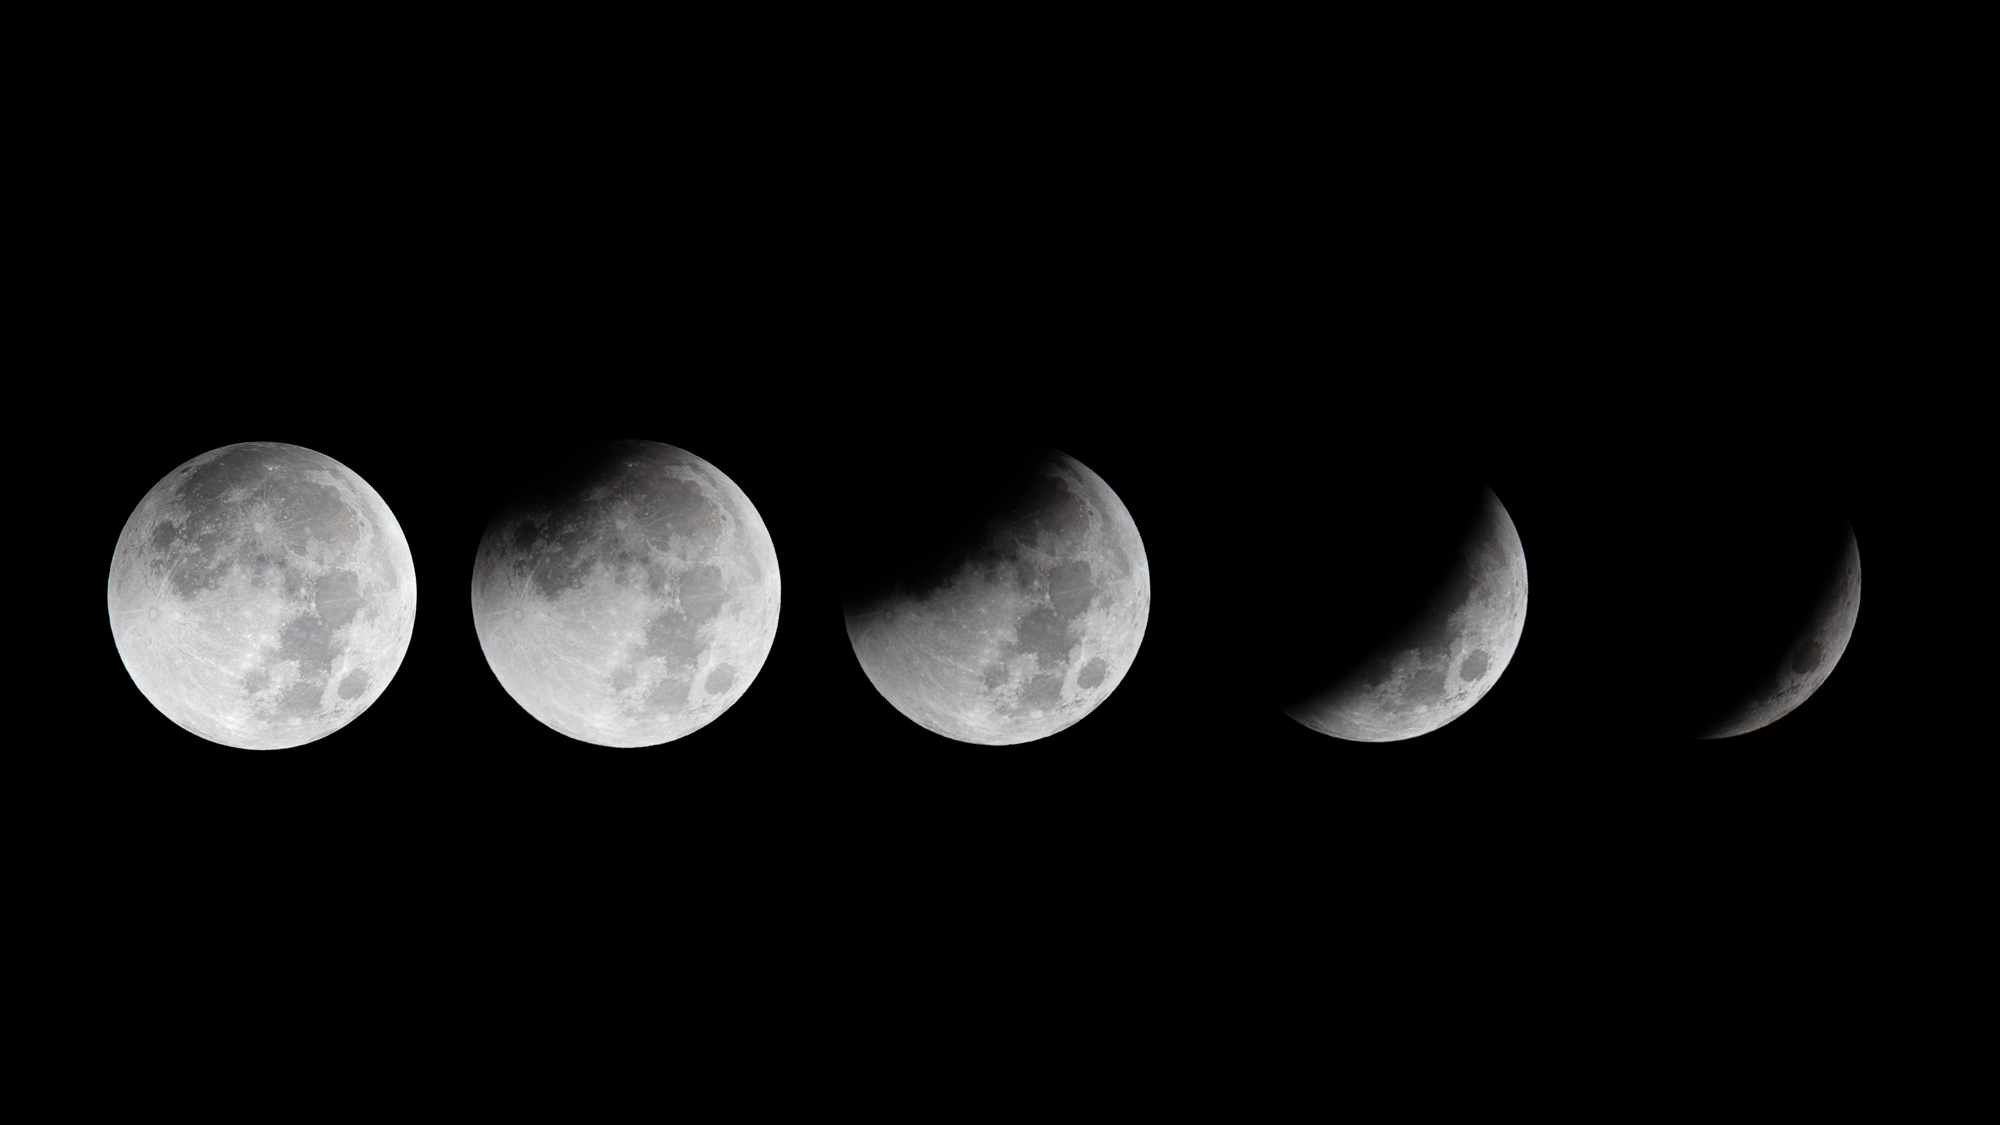 Composite image of phases of recent lunar eclipse